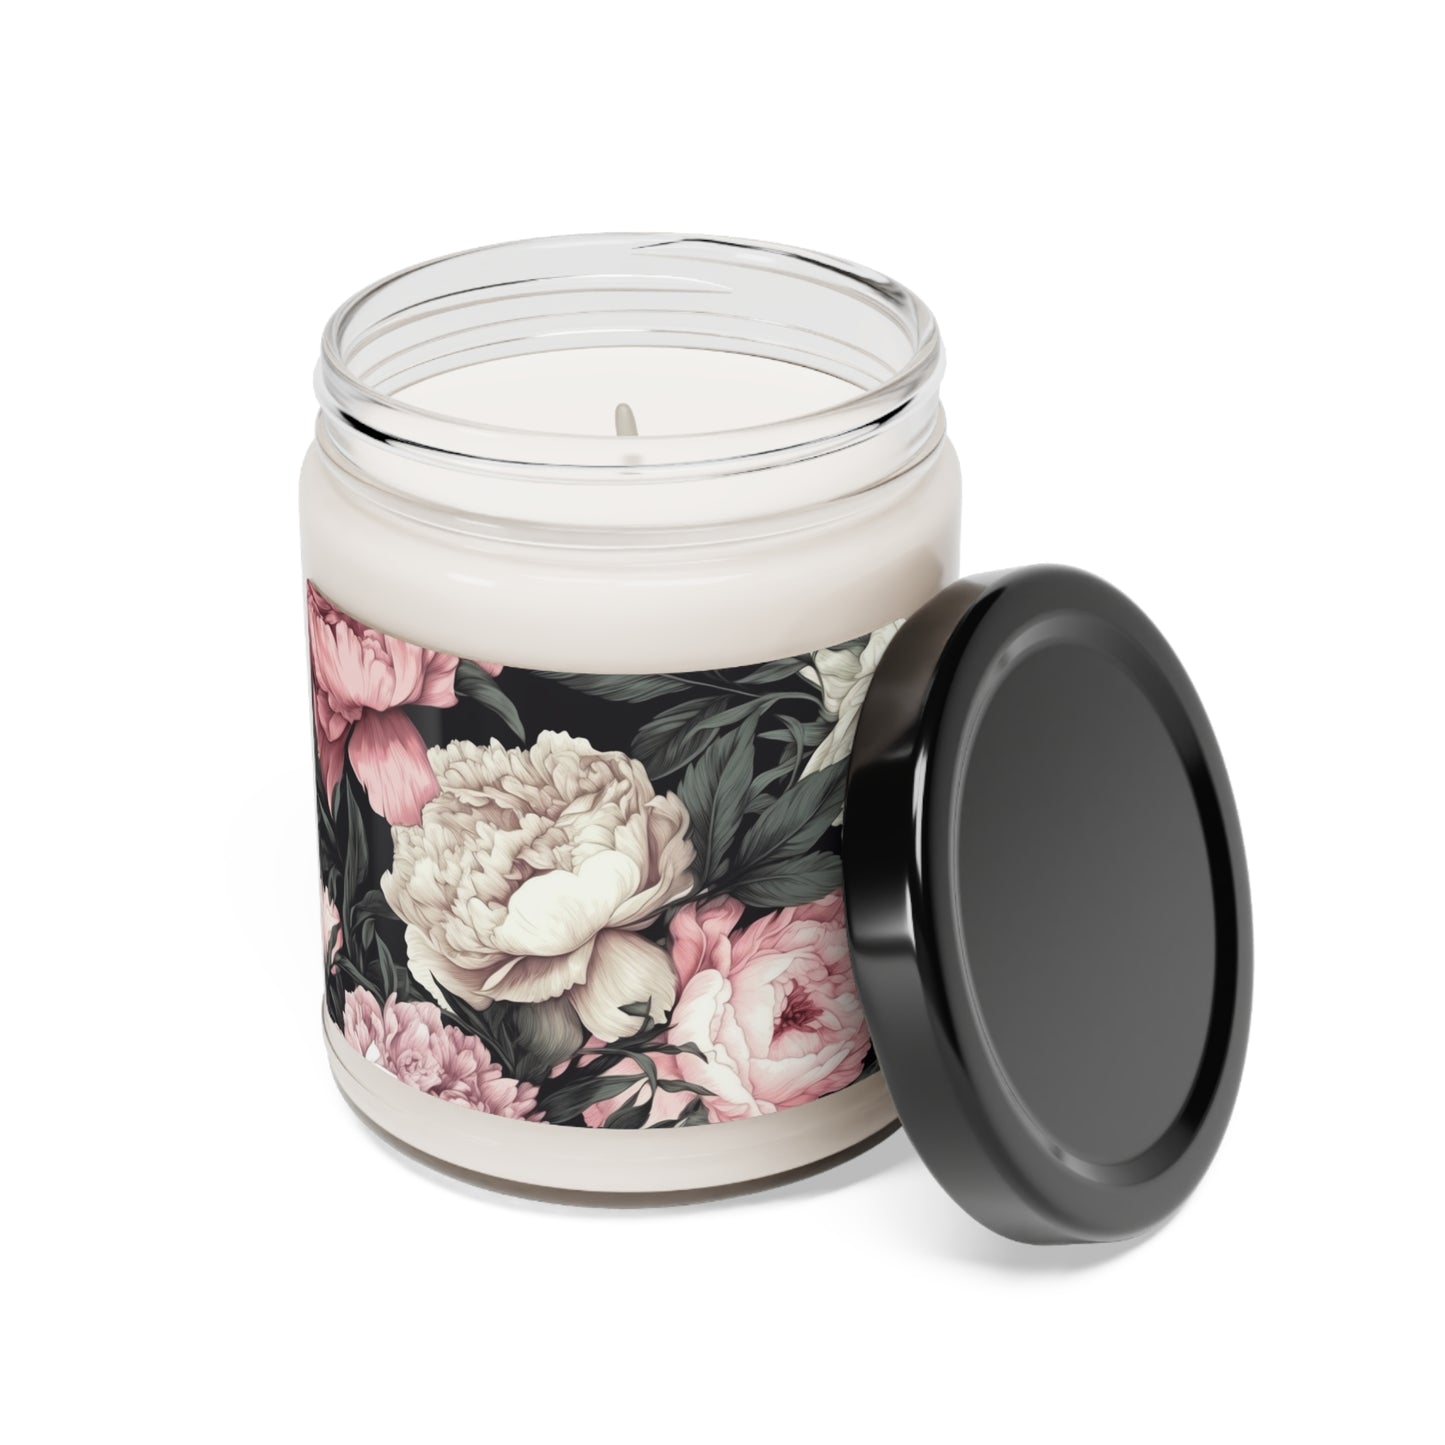 Candles- Scented Soy Candle, 9oz Pink and White Flowers